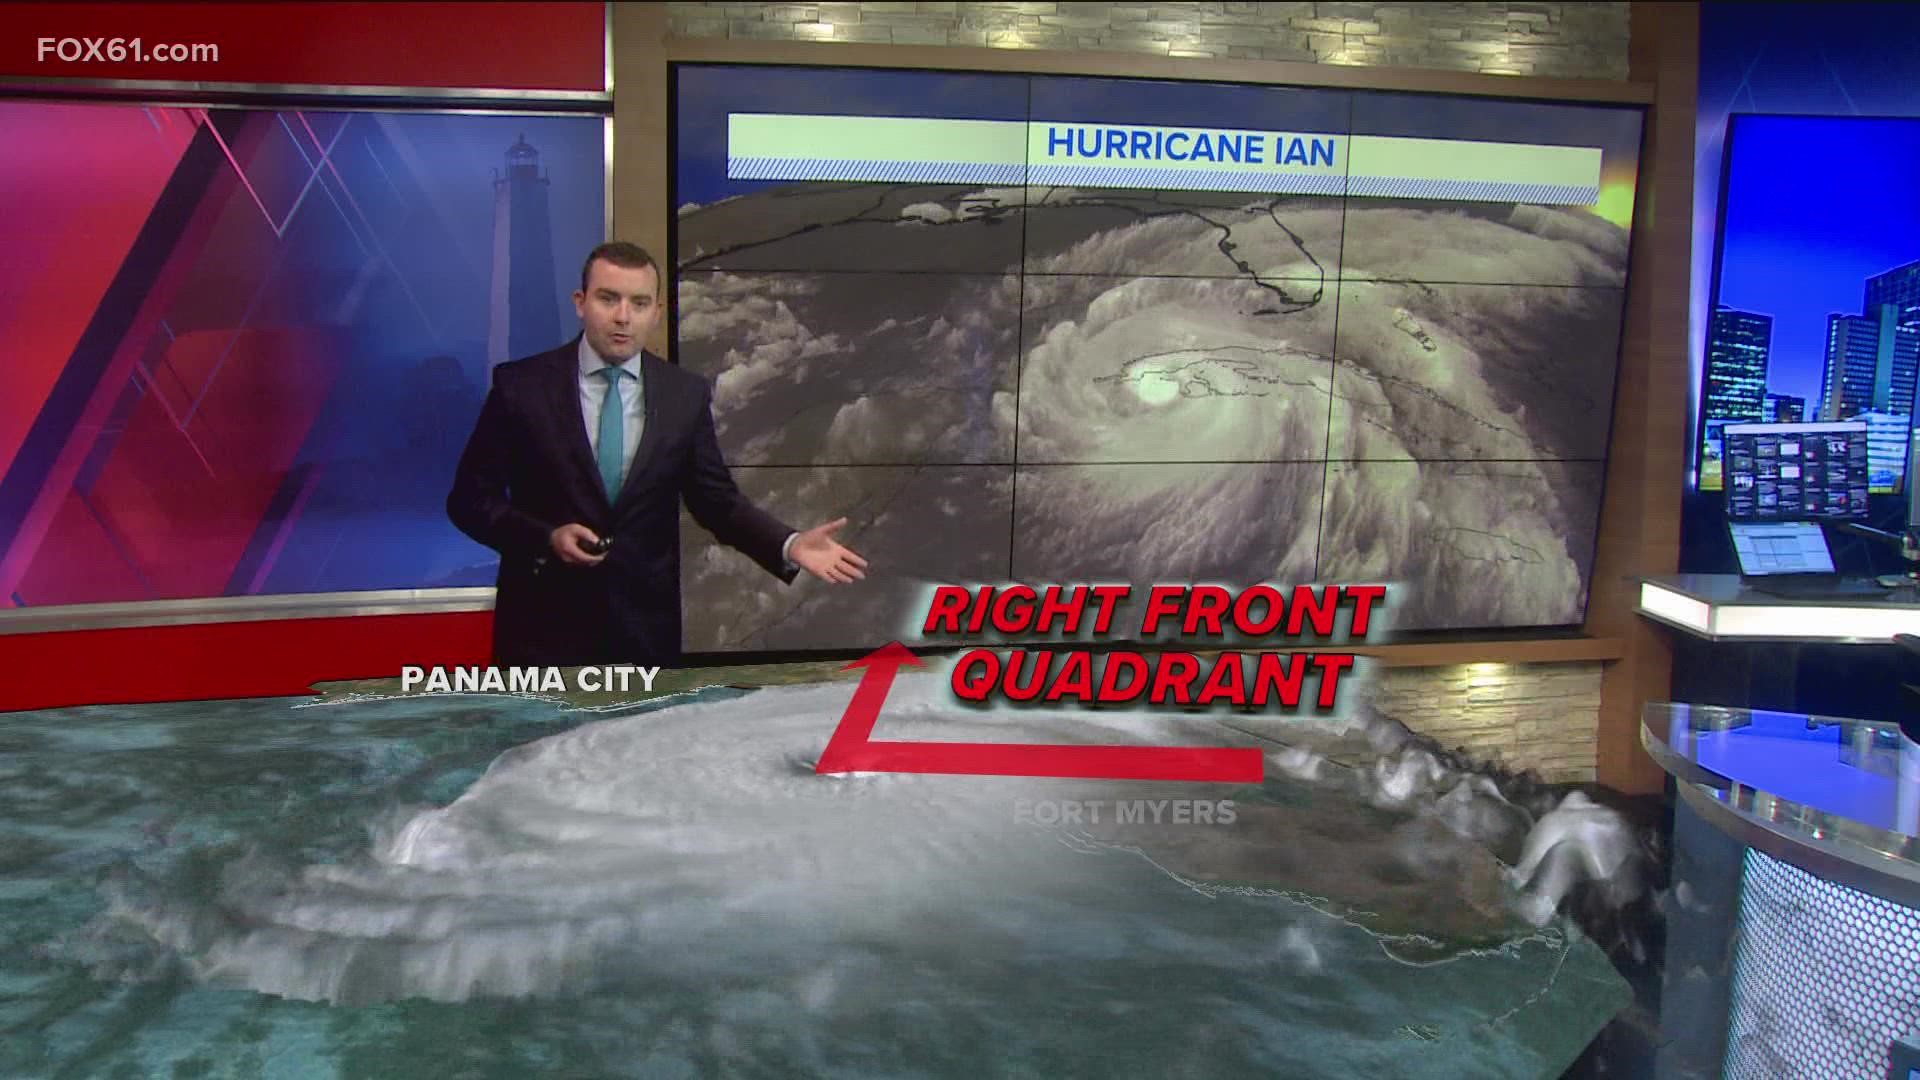 Meteorologist Ryan Breton explains the right front quadrant of hurricanes, and how they can contain the worst conditions.